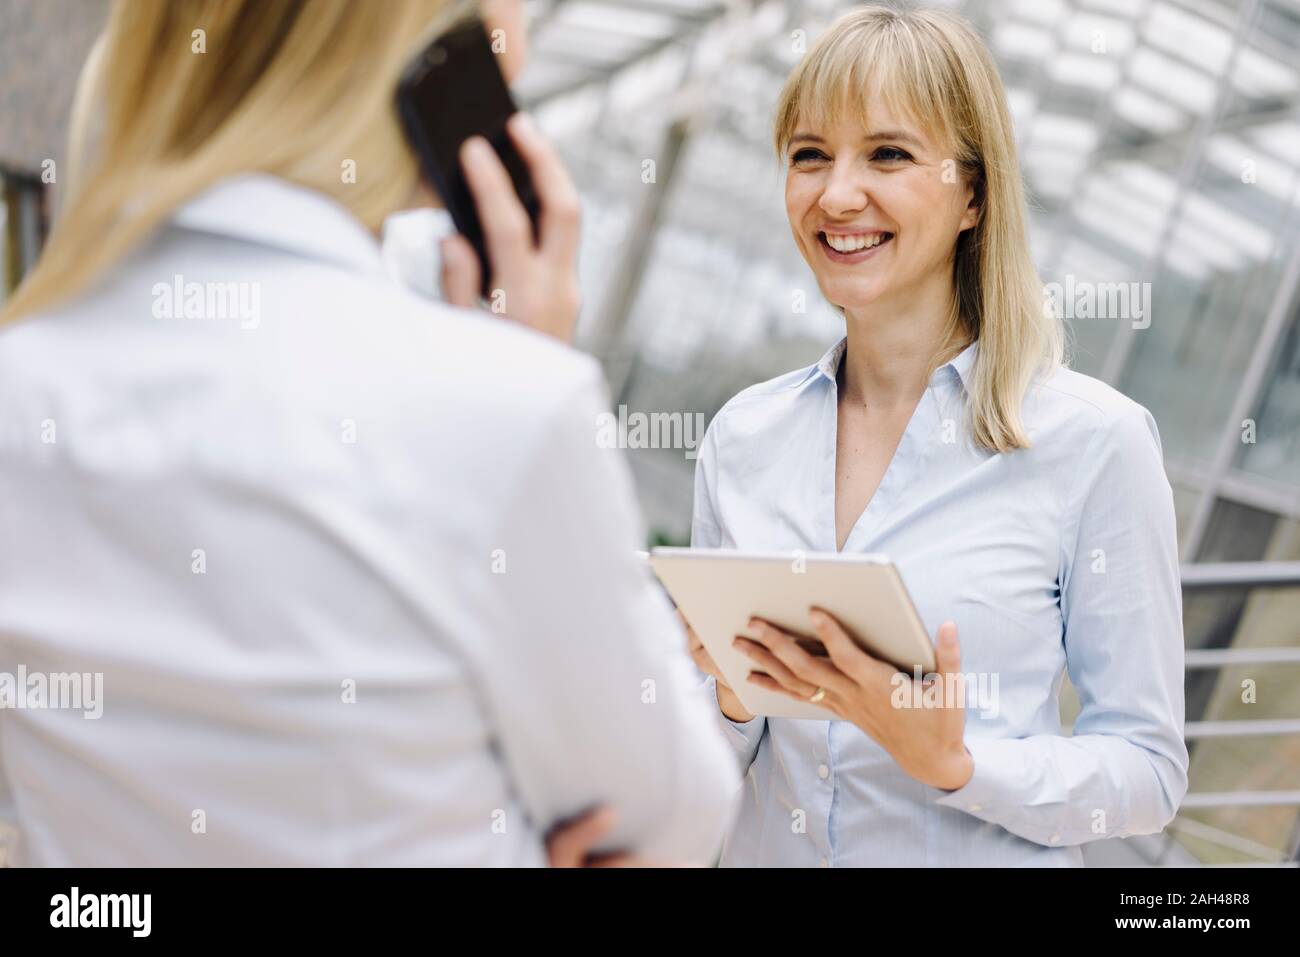 Portrait of young businesswoman with tablet smiling at office Banque D'Images